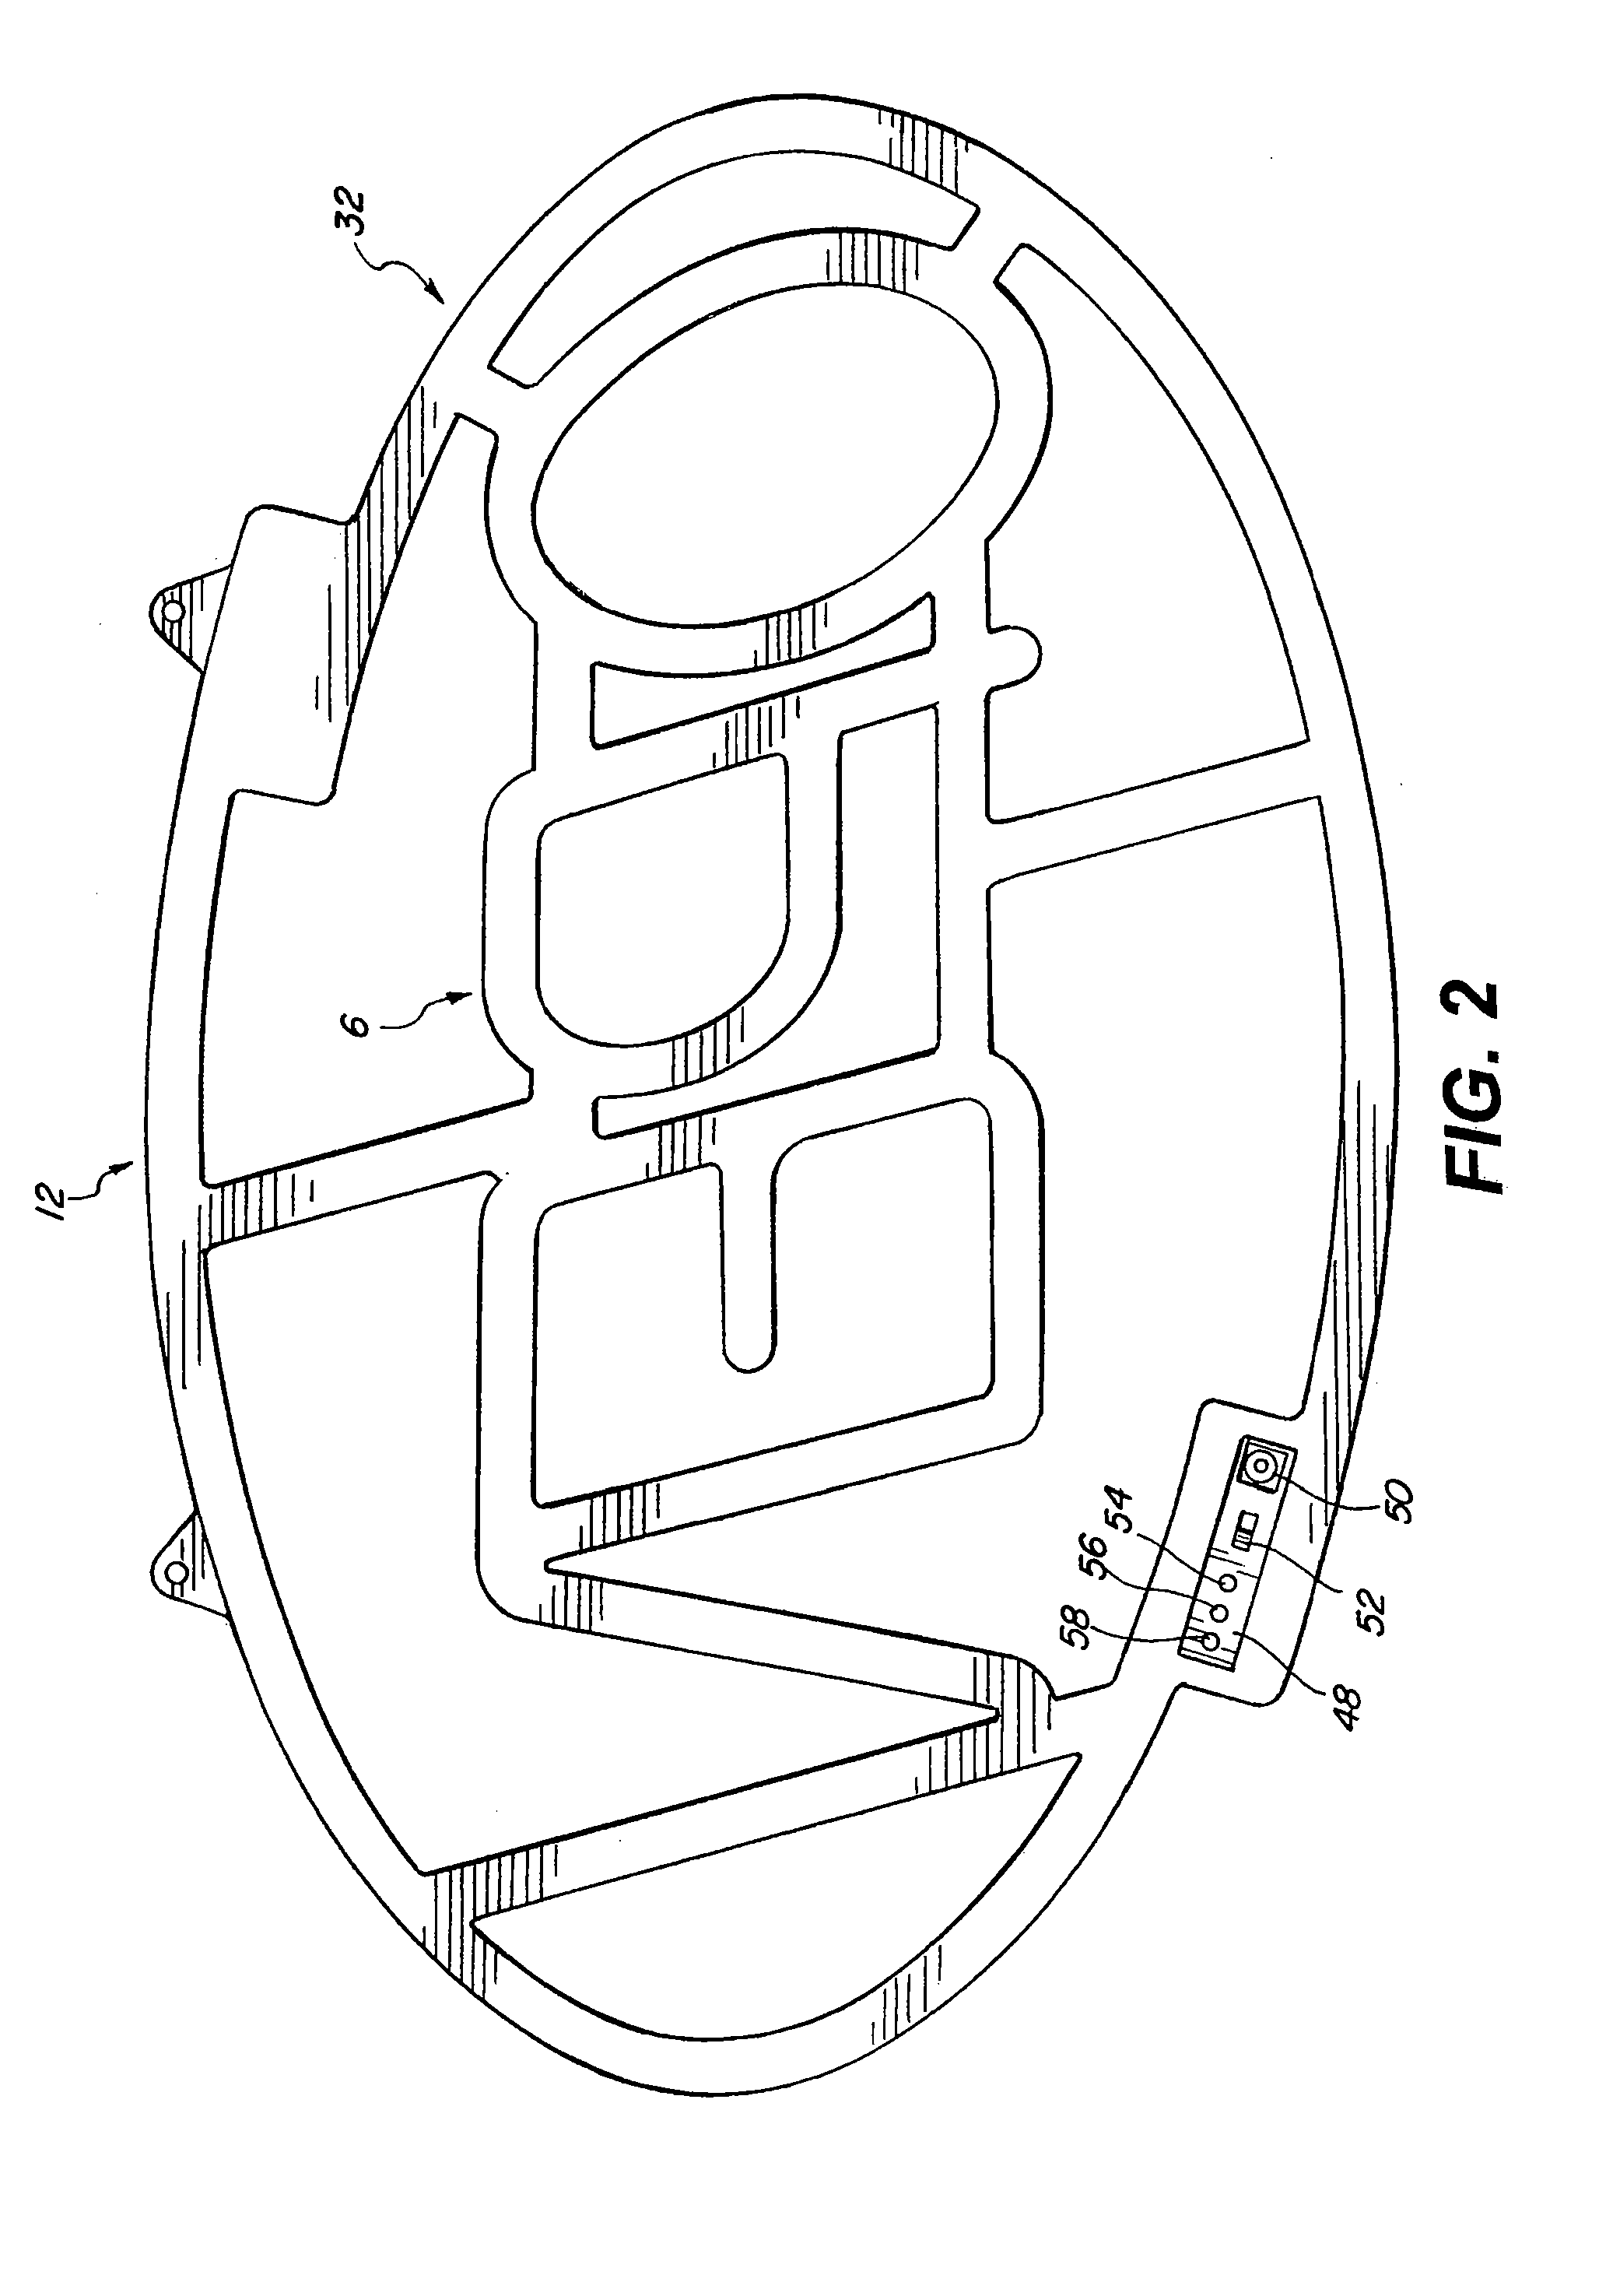 Method and apparatus for providing a simulated neon sign